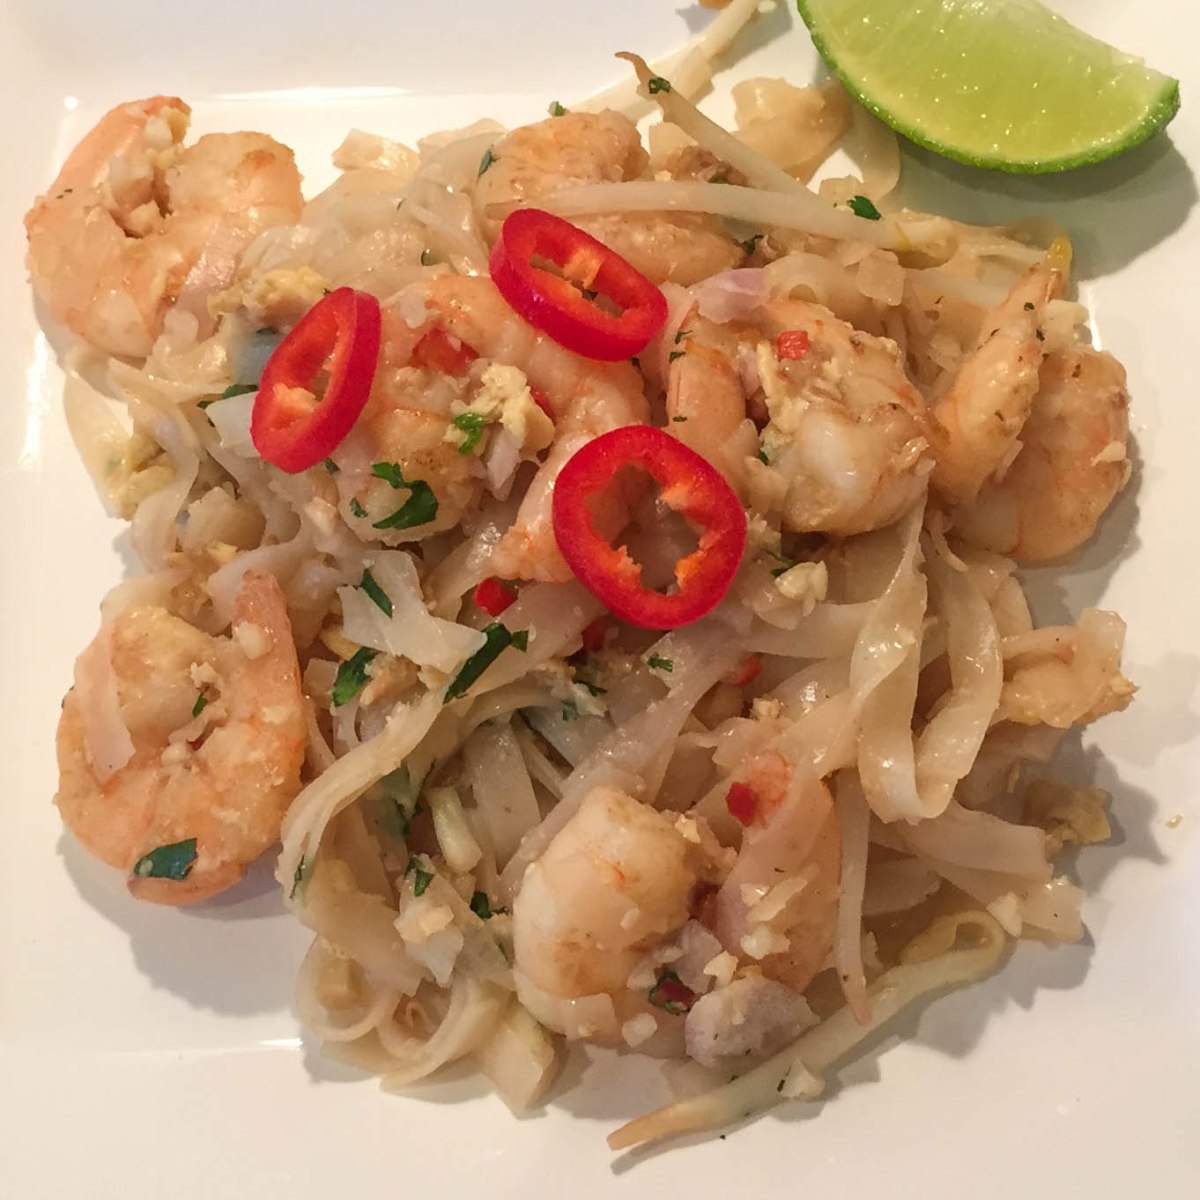 A photo of the finished Pad Thai dish served on a white plate and ready to eat